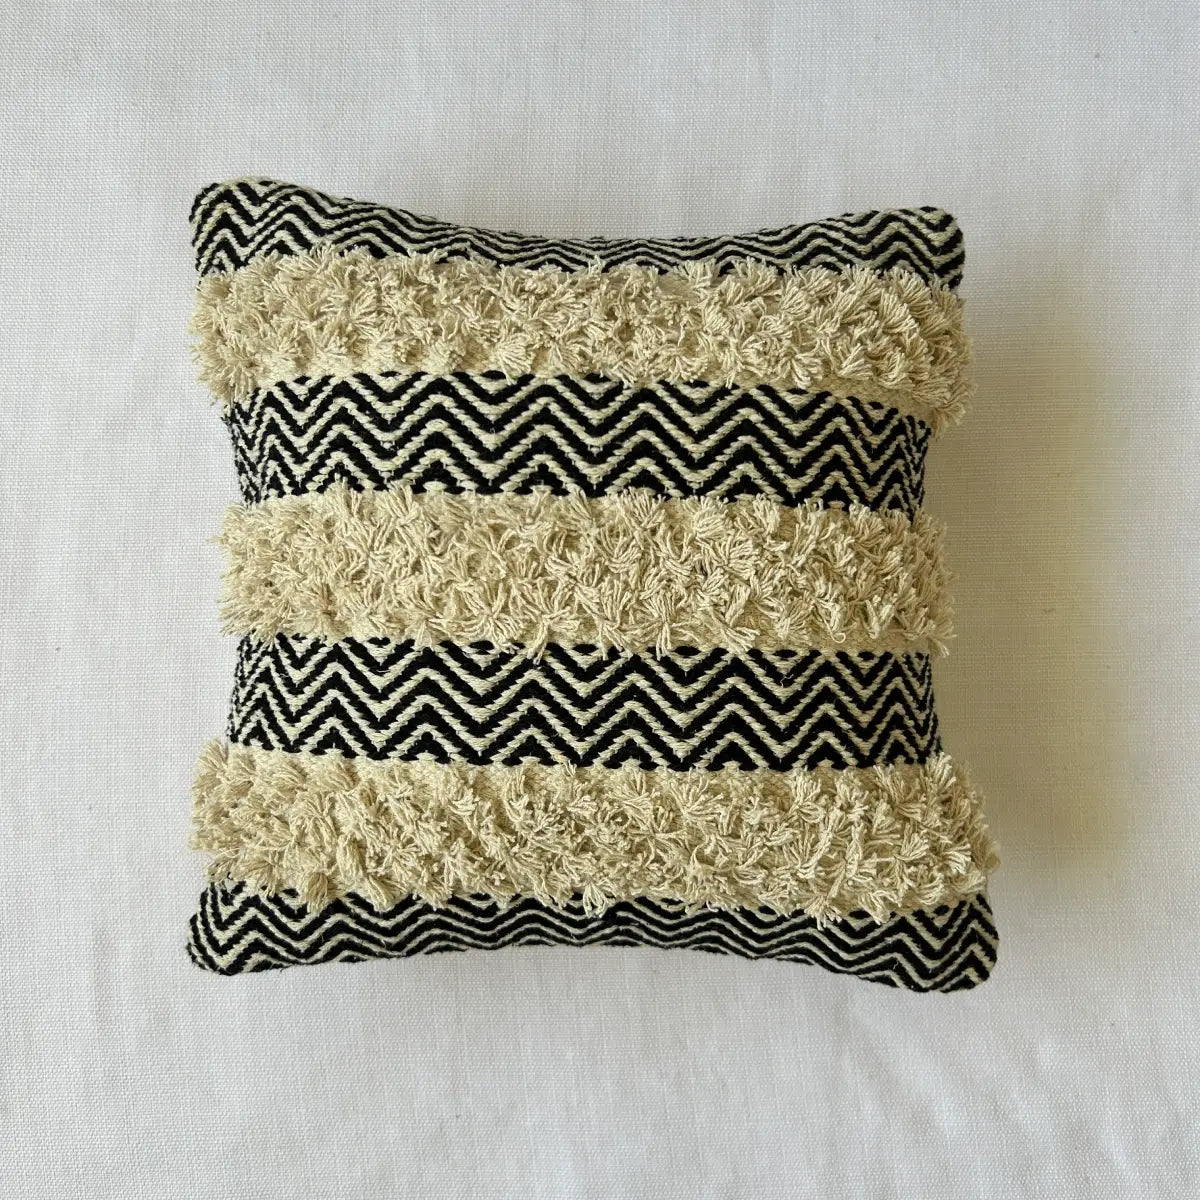 16x16 Inch Cotton Boho Cushion Cover: Elevate Your Modern Living Space | Export House